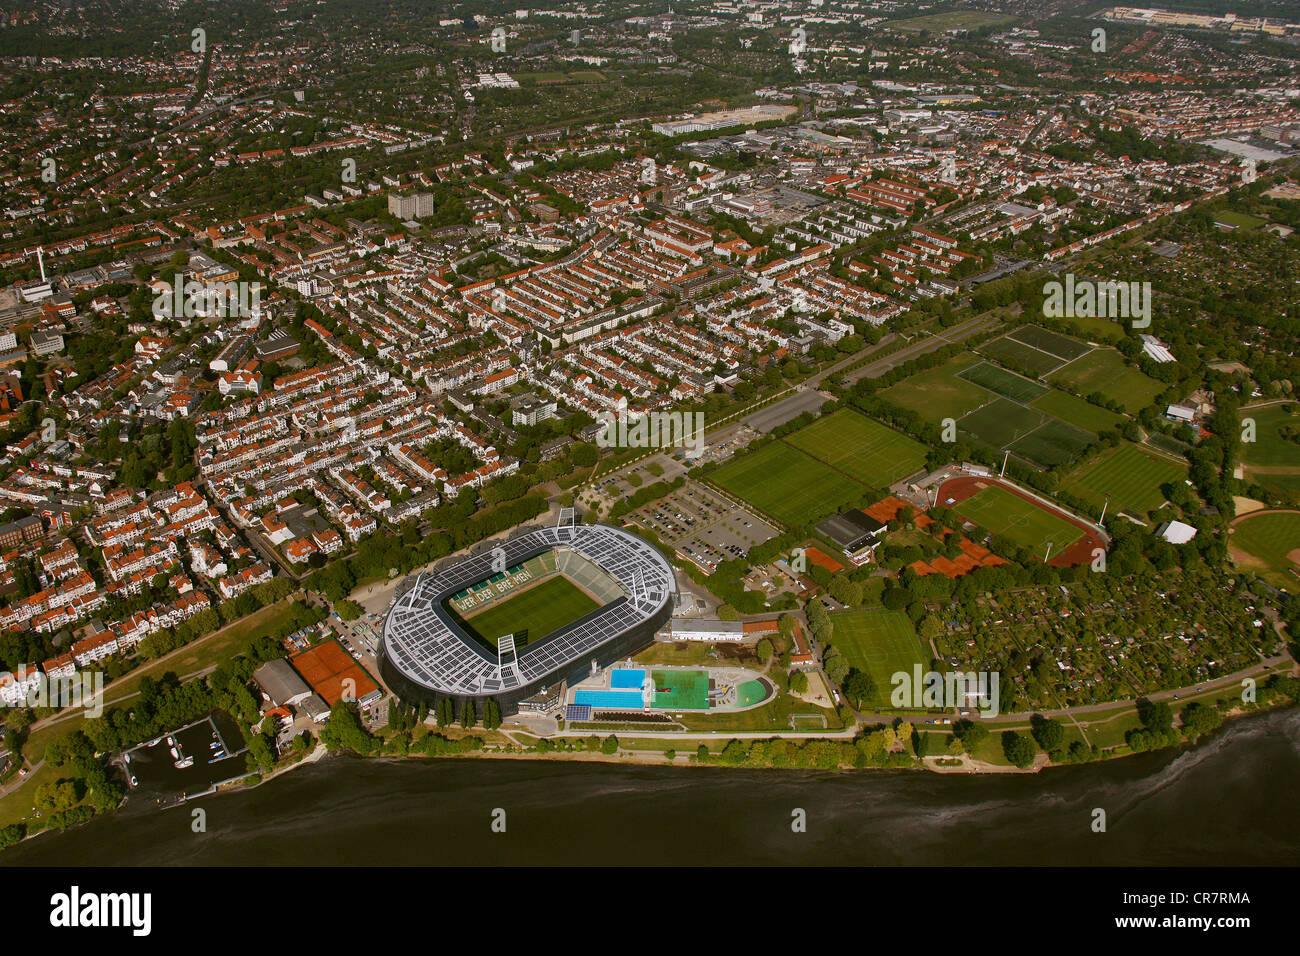 Aerial view, Weserstadion, stadium with solar panels on the roof, Bremen, Germany, Europe Stock Photo